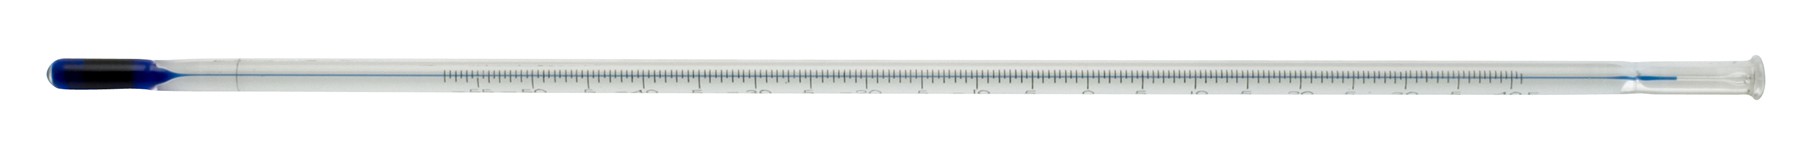 H-B DURAC Plus ASTM Like Liquid-In-Glass Thermometer; 16C / High Softening Point, Total Immersion, 30 to 200C, Organic Liquid Fill